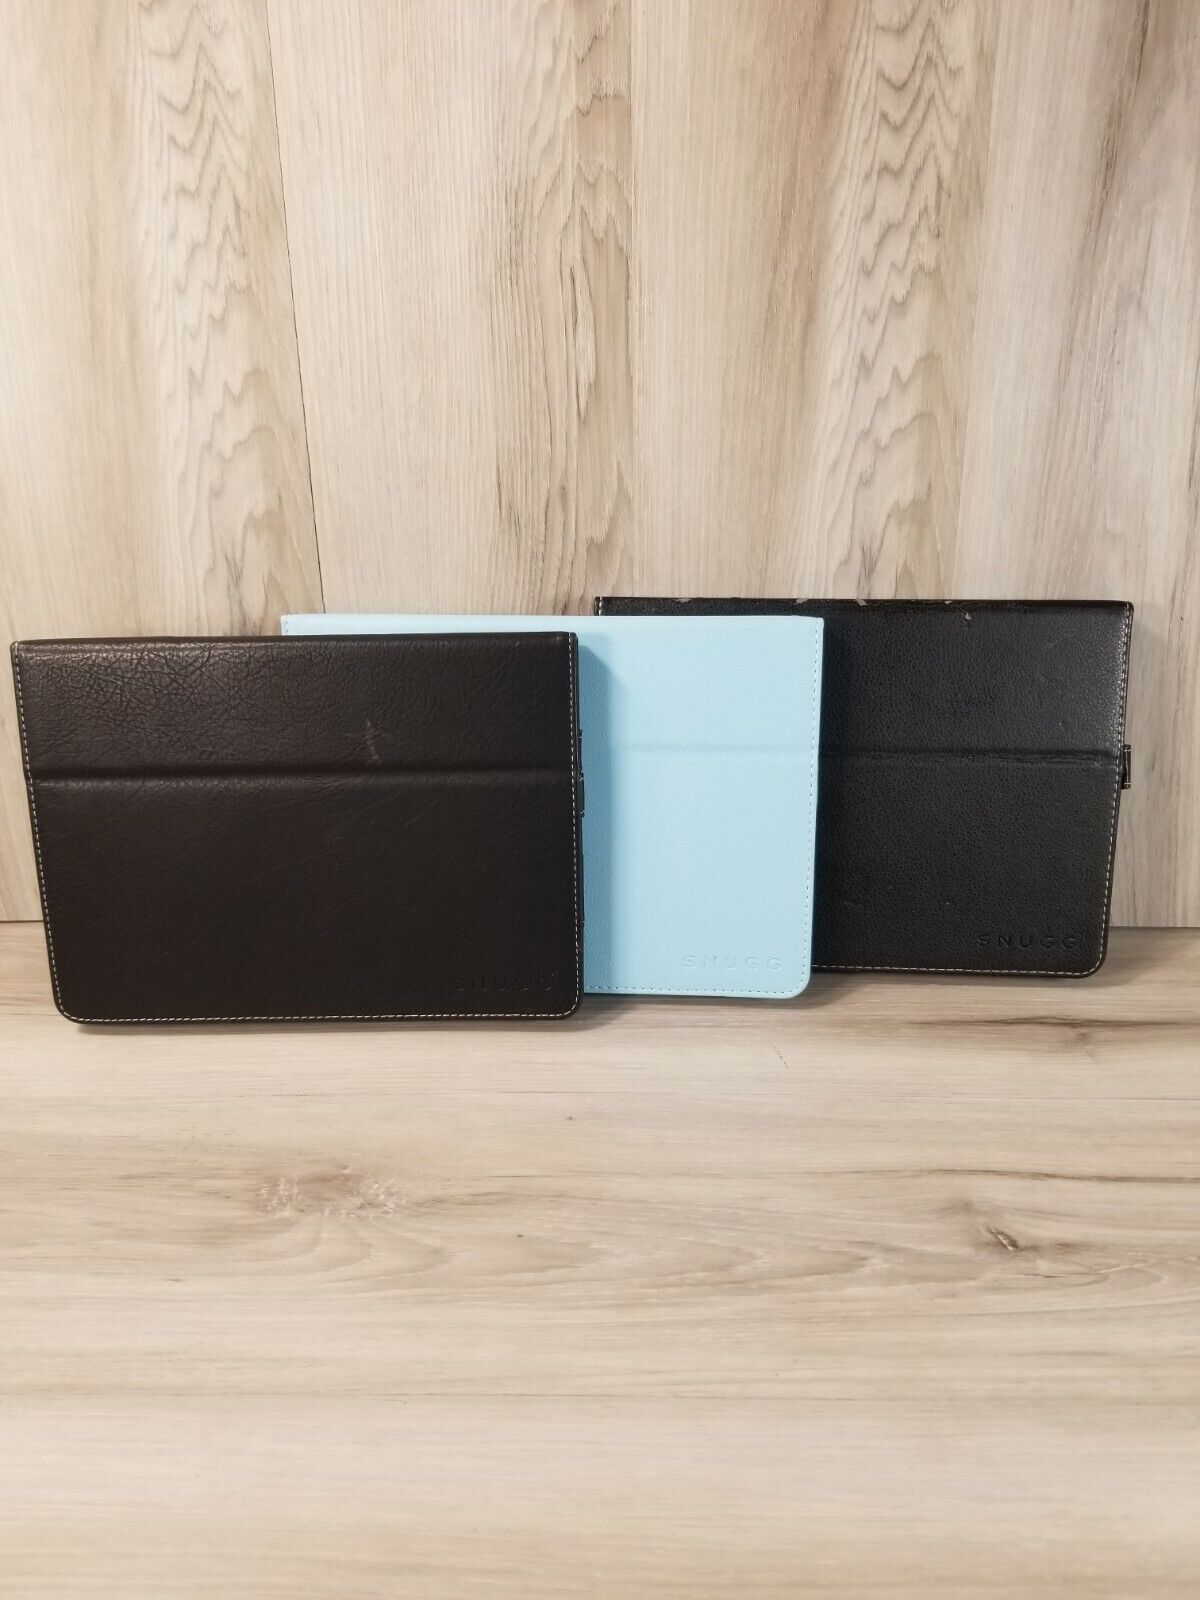 3 Piece Lot Snugg Tablet Case  Two Black and One Light Blue 10.9